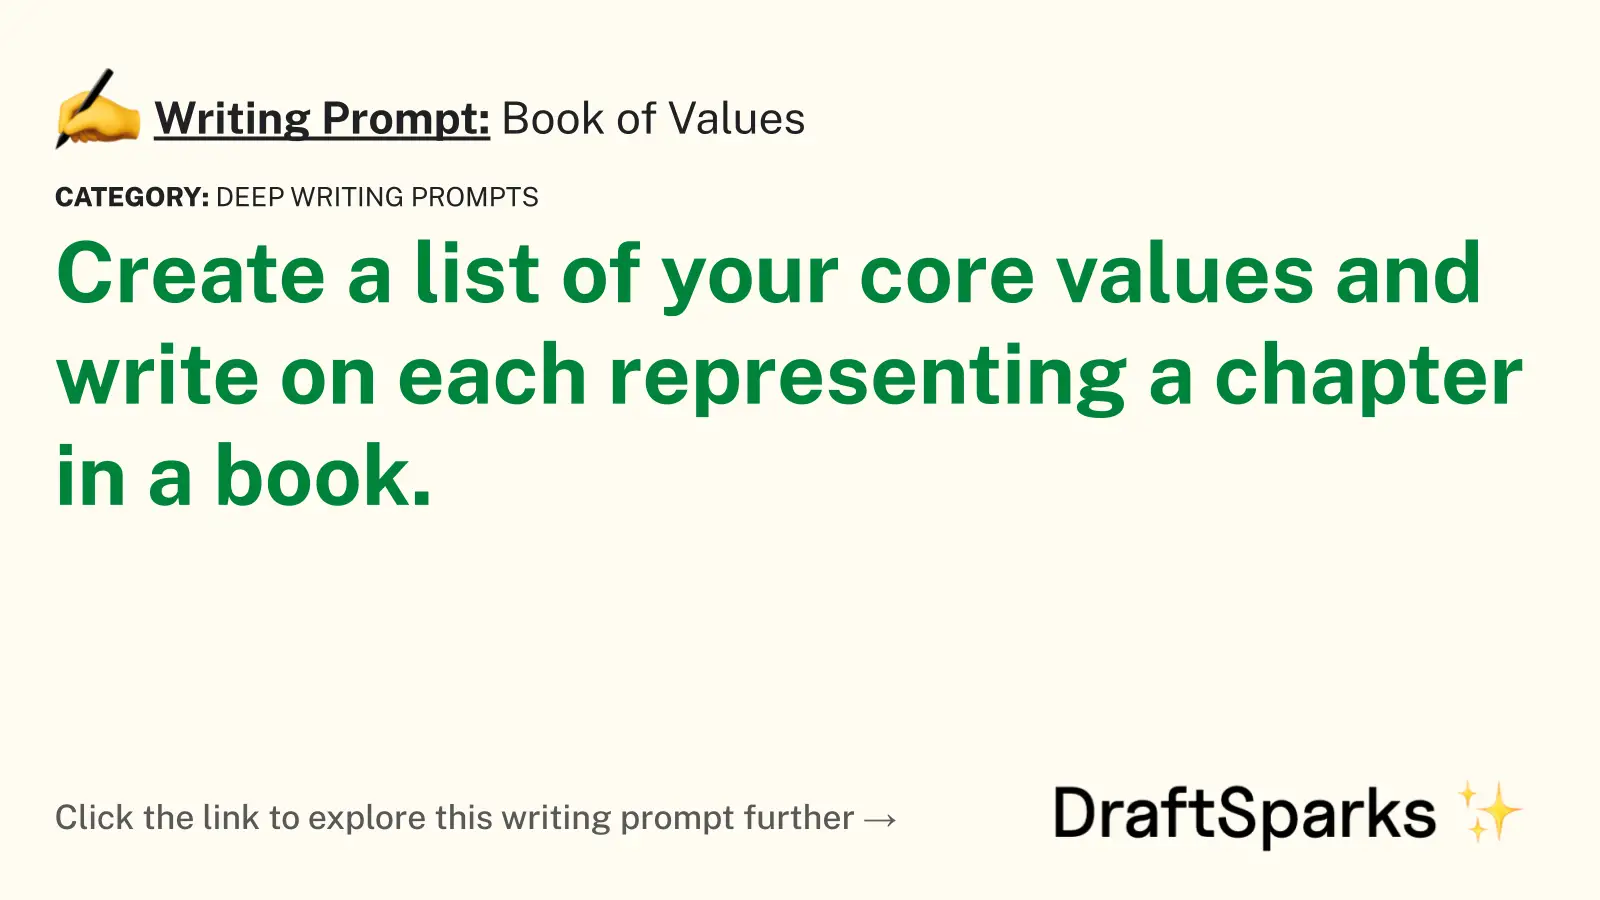 Book of Values